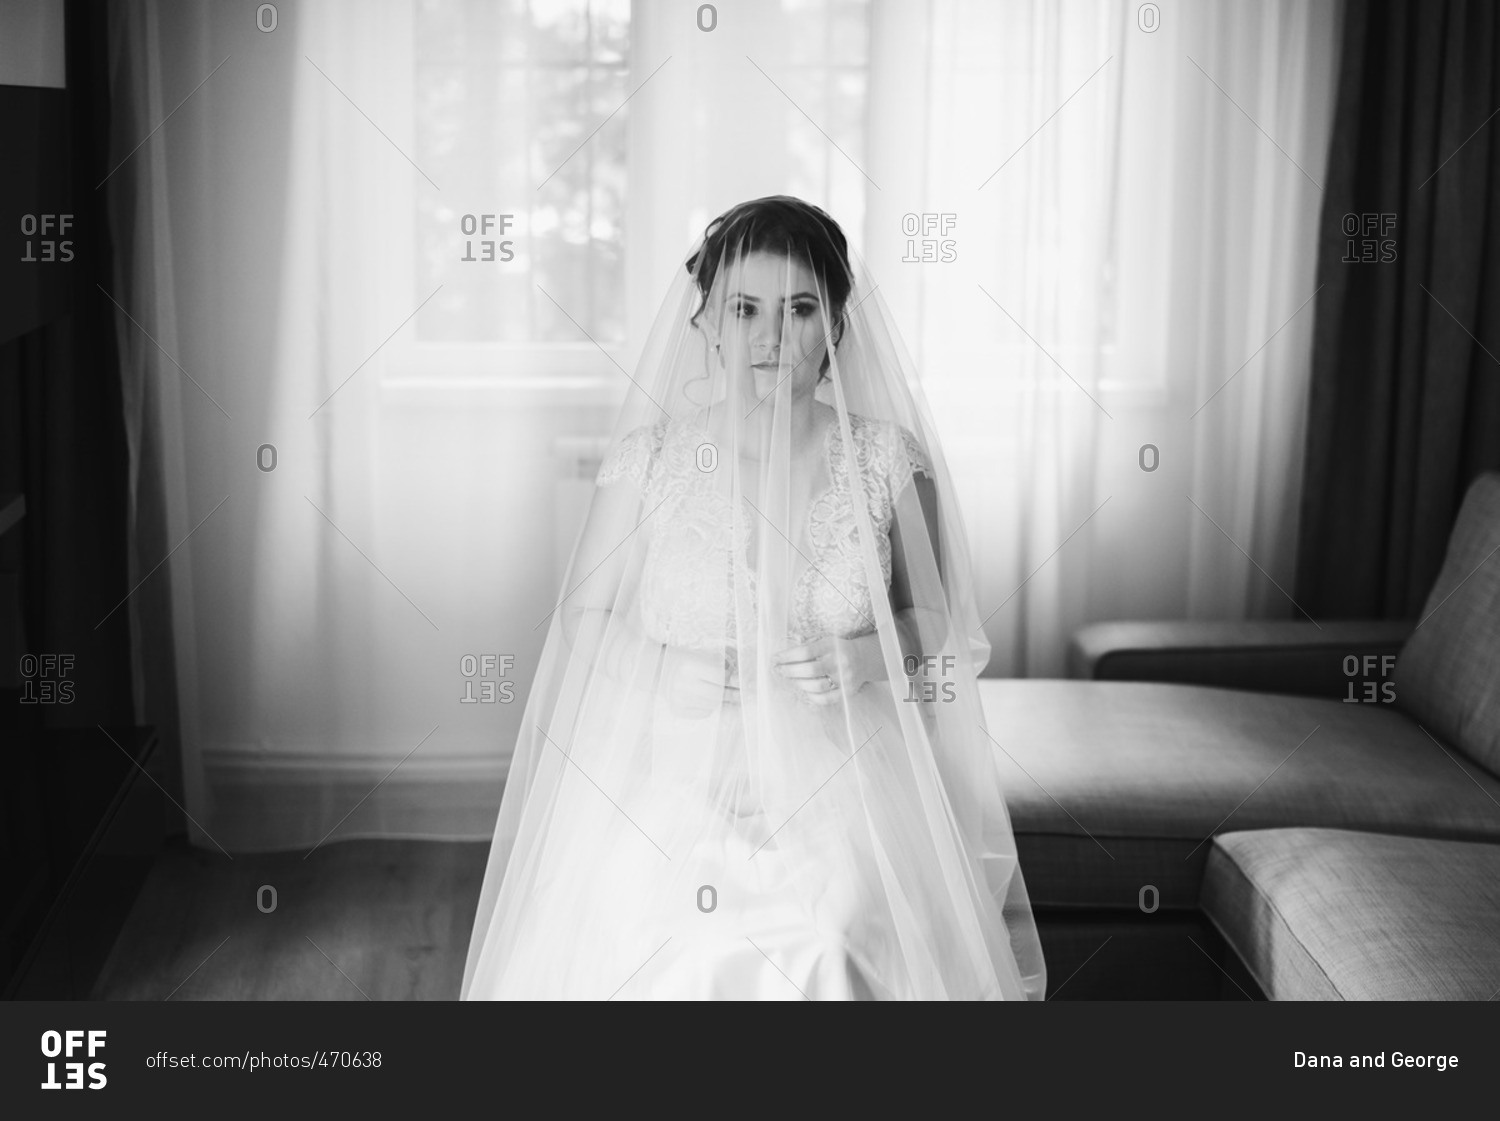 Seated bride with veil over her head